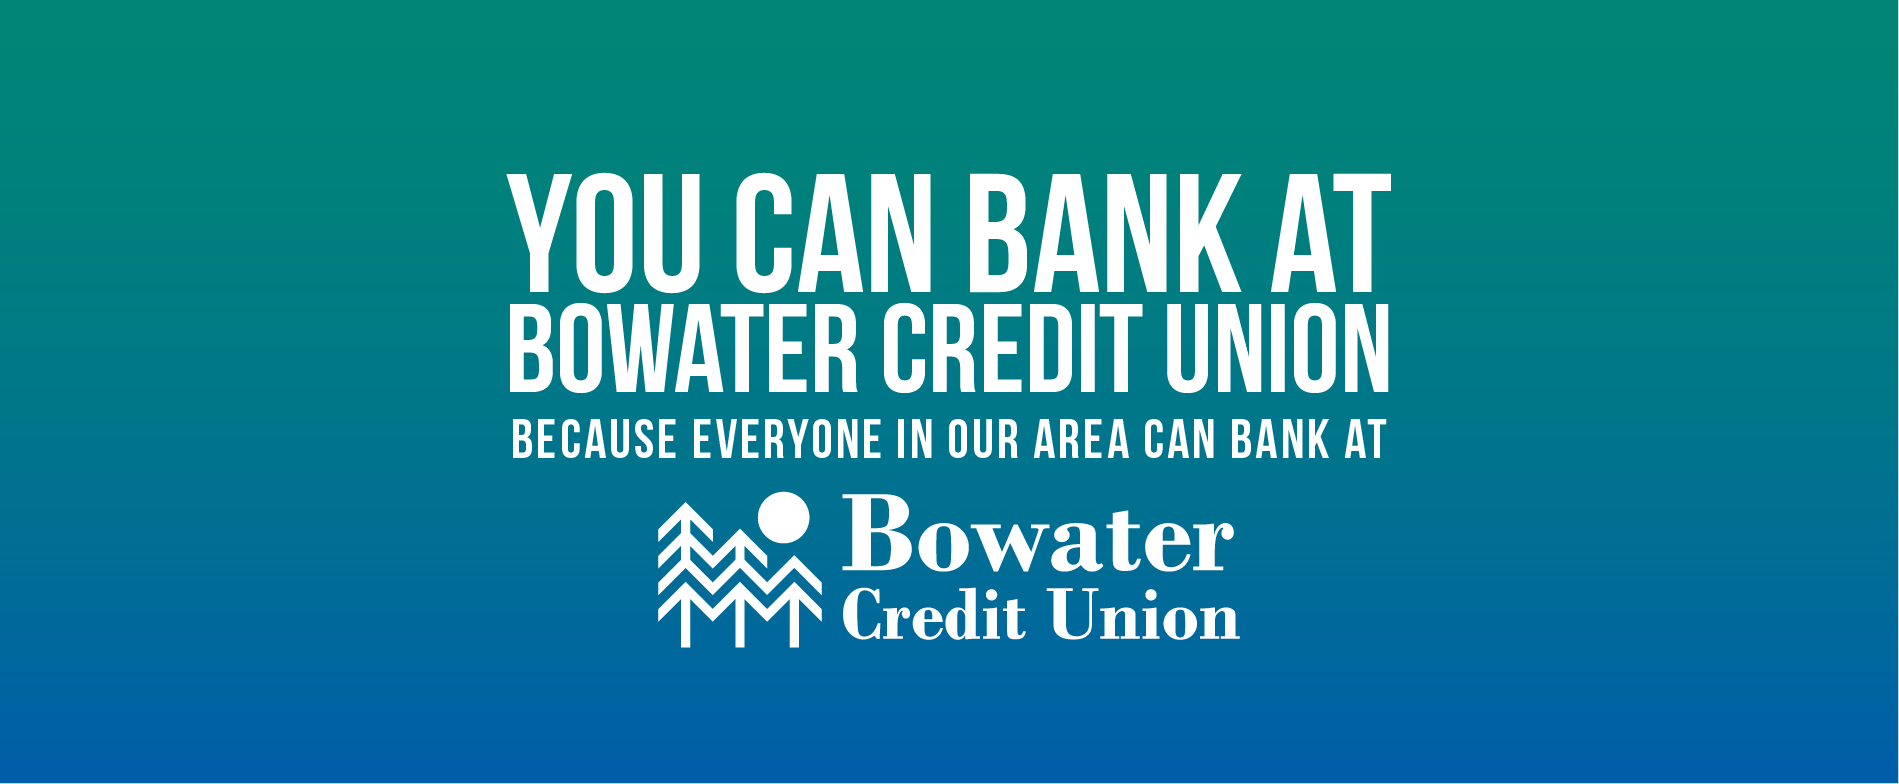 you can bank at Bowater Credit Union